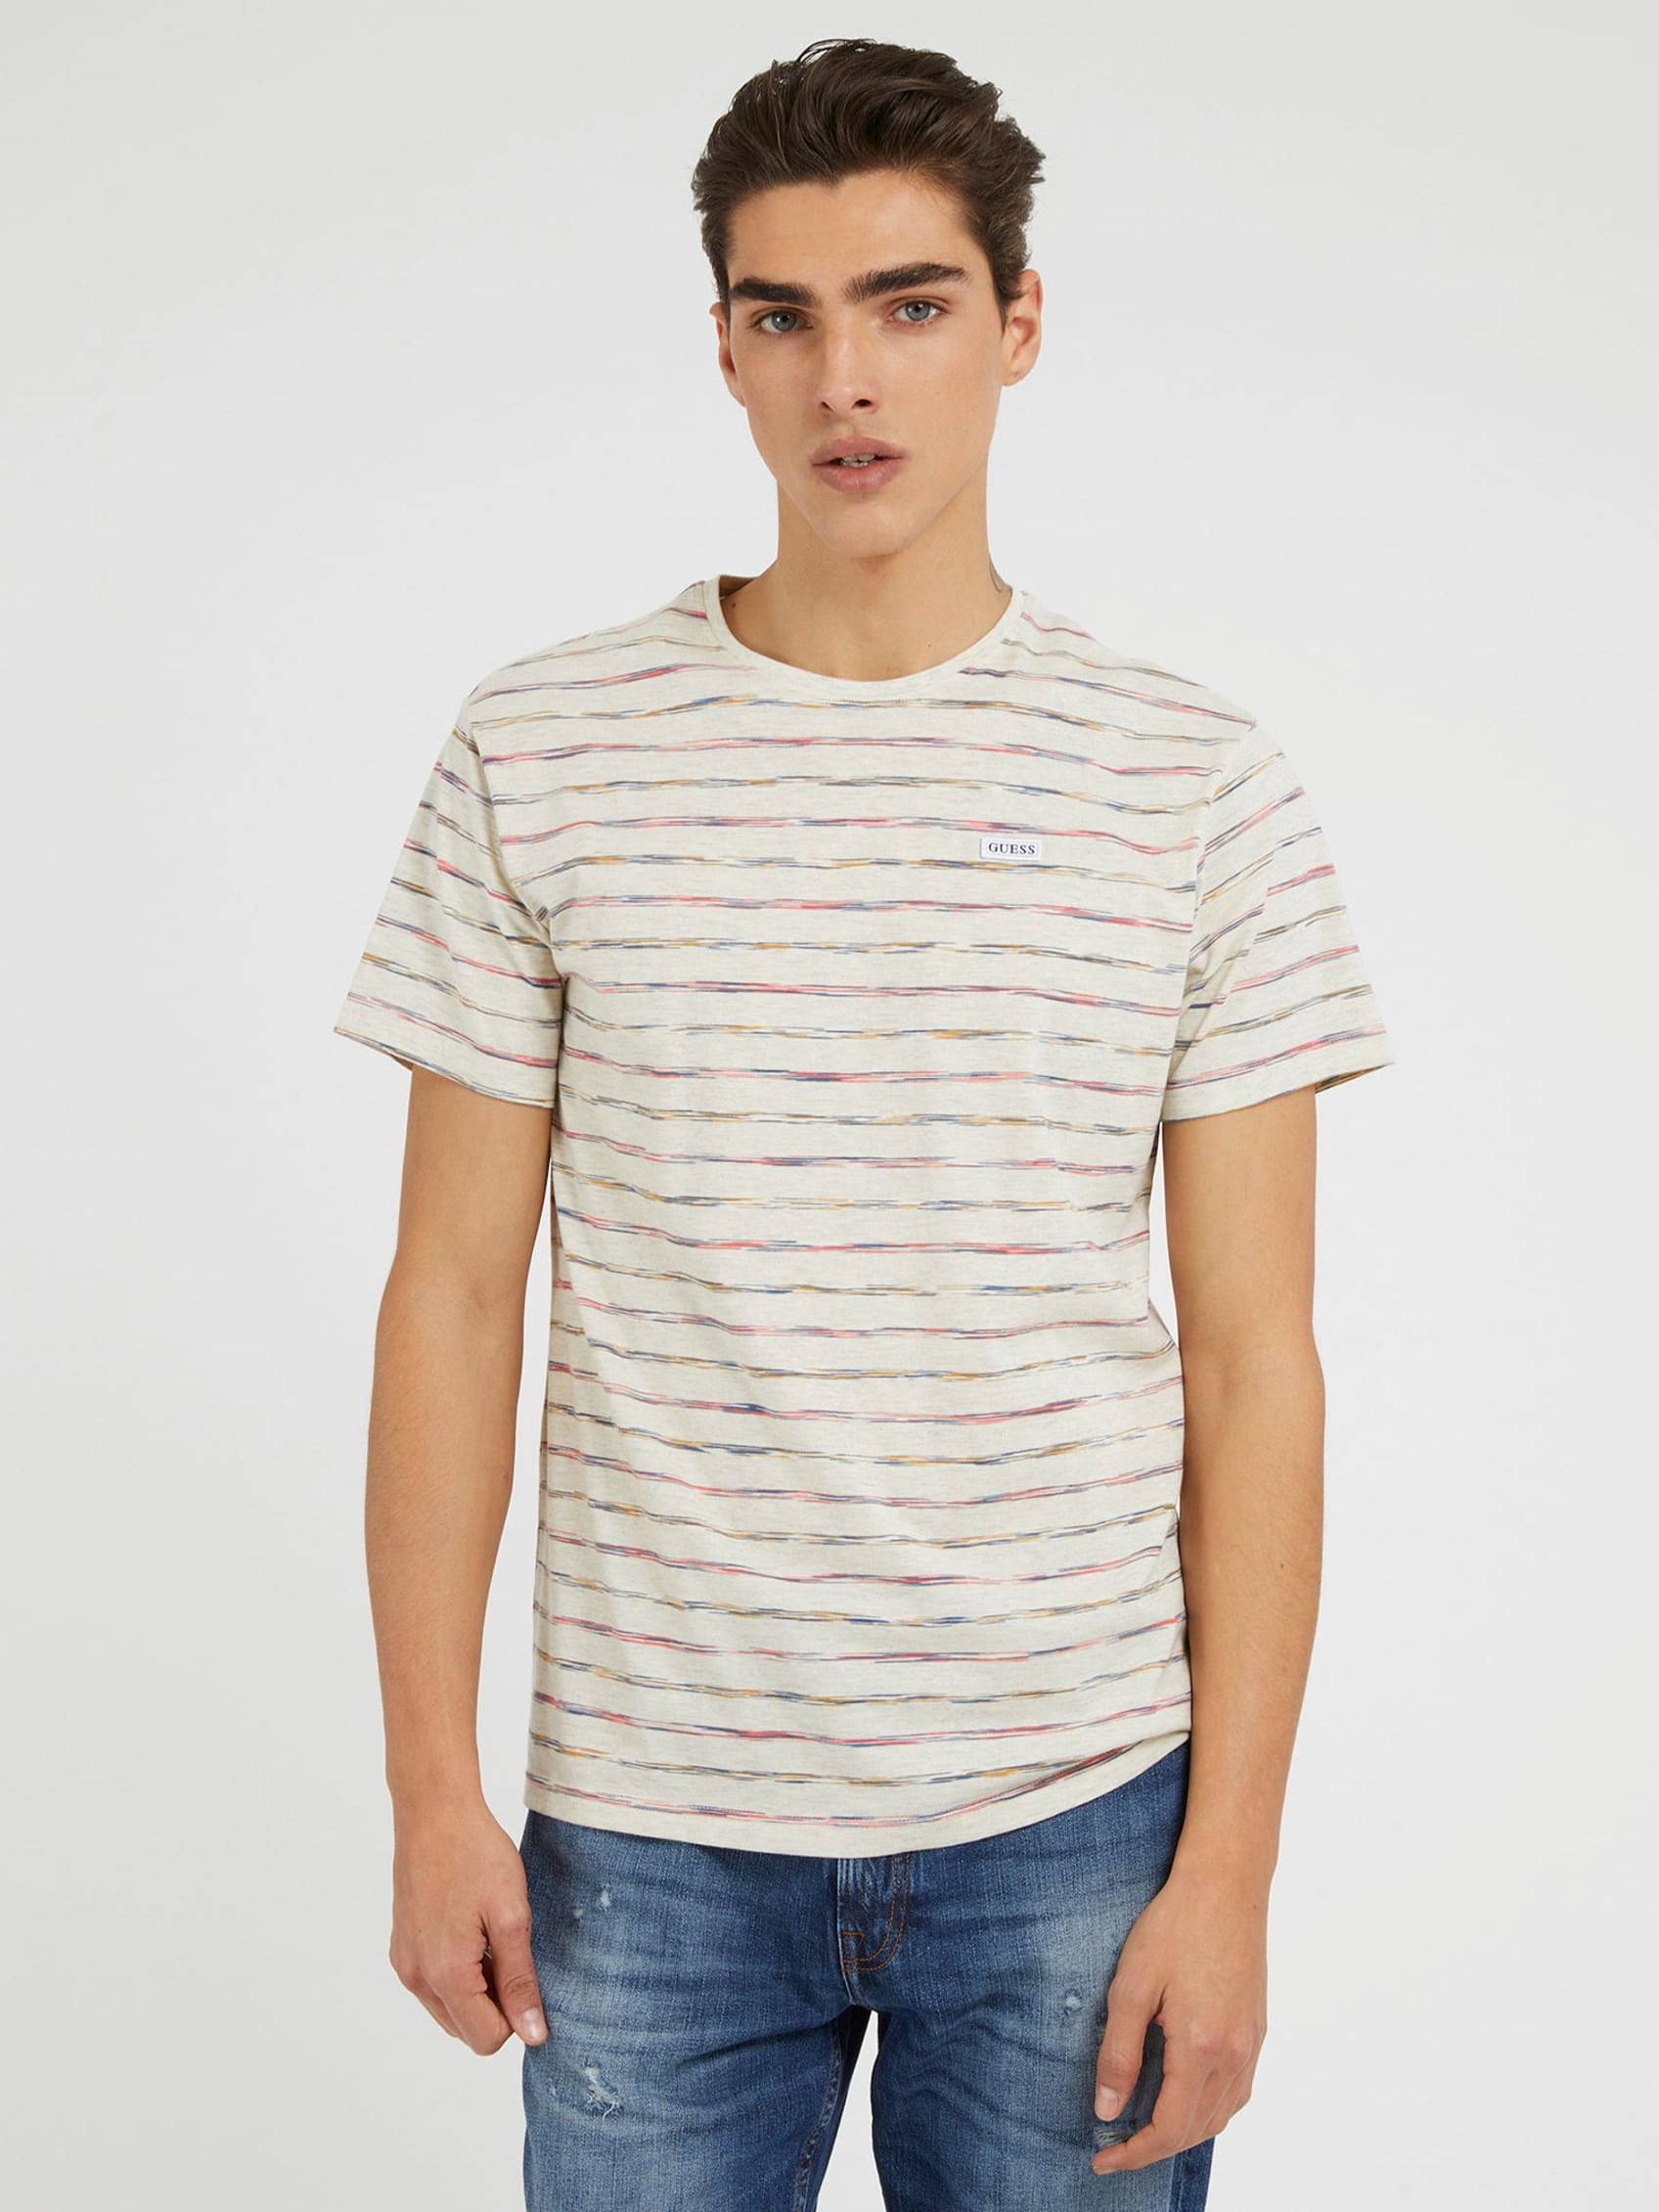 CREW NECK STRIPED GUESS PATCH TEE | Guess Philippines